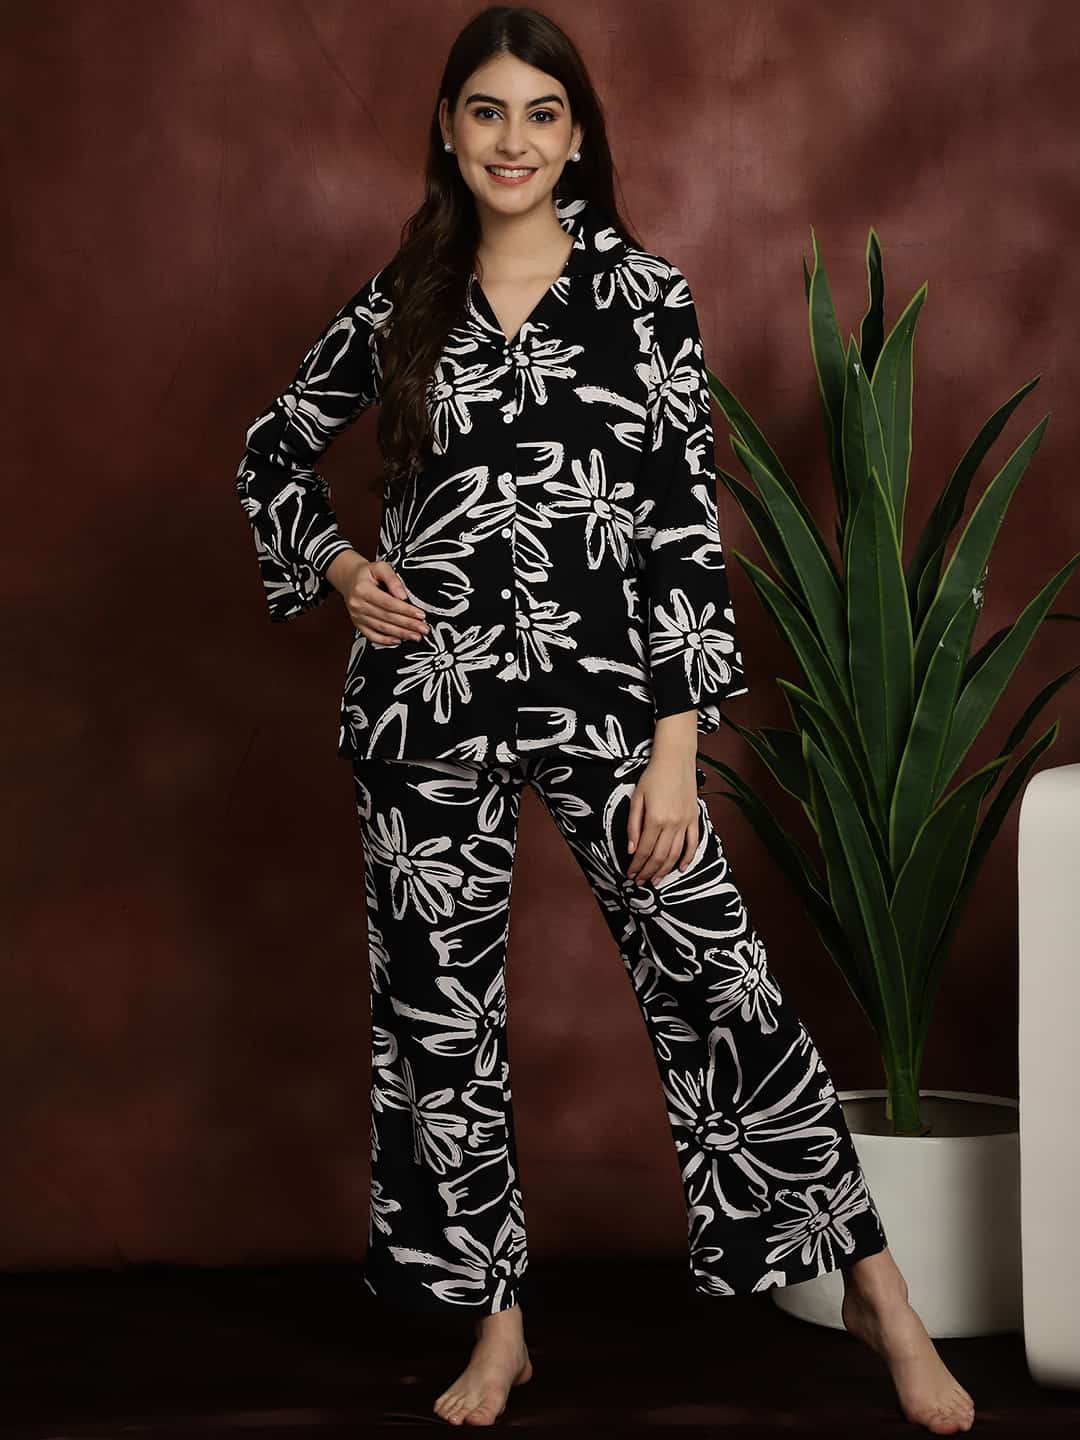 Buy Claura Black Cotton Night Suit for Women/Pajama Set for Women (Small)  at Amazon.in